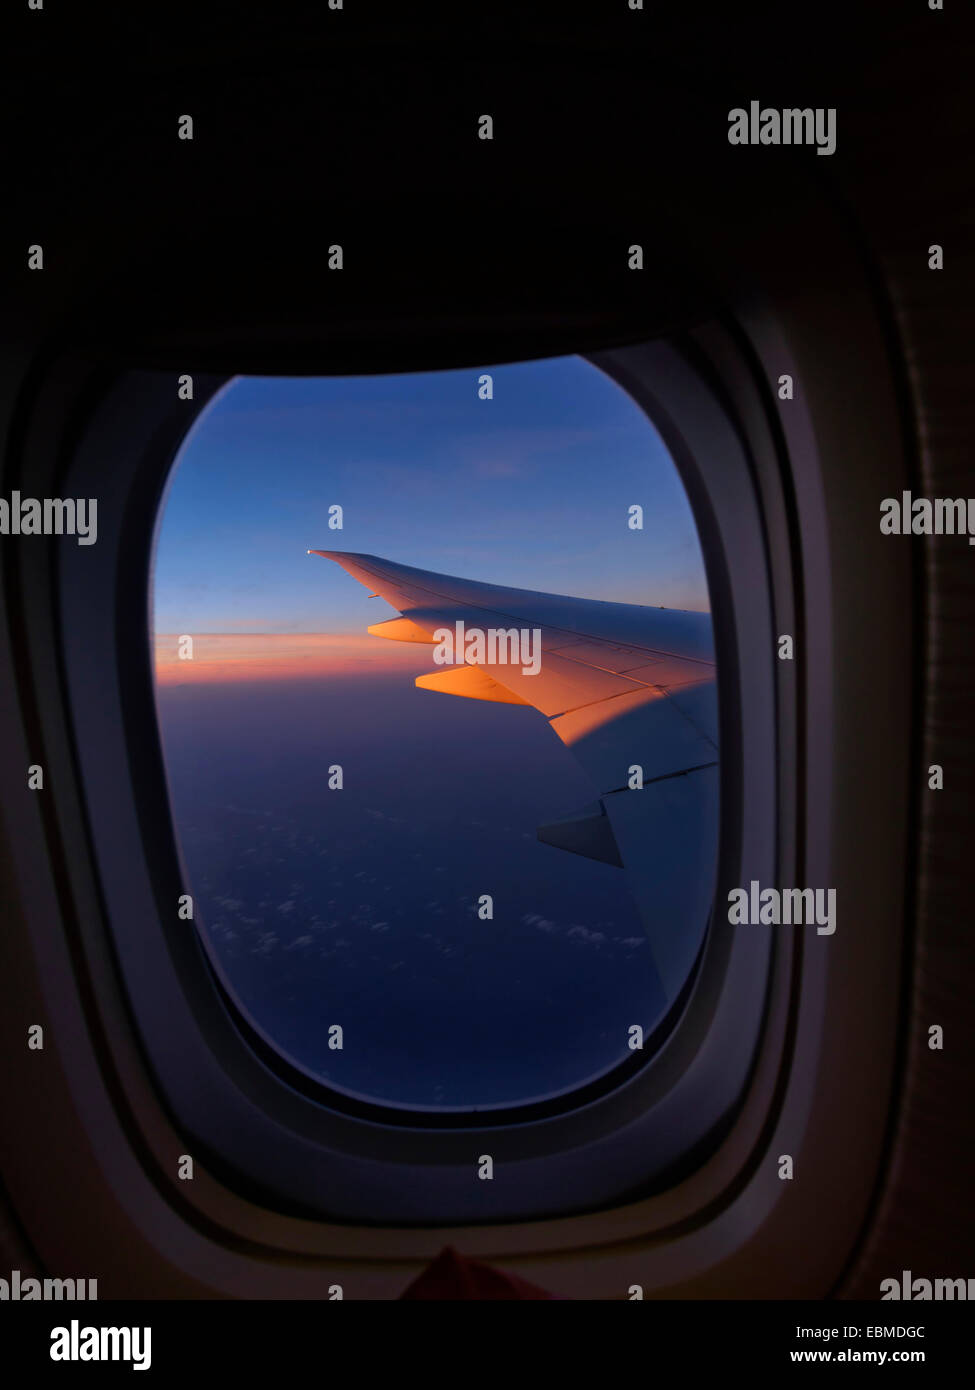 View of airplane wing from inside the aircraft's window Stock Photo